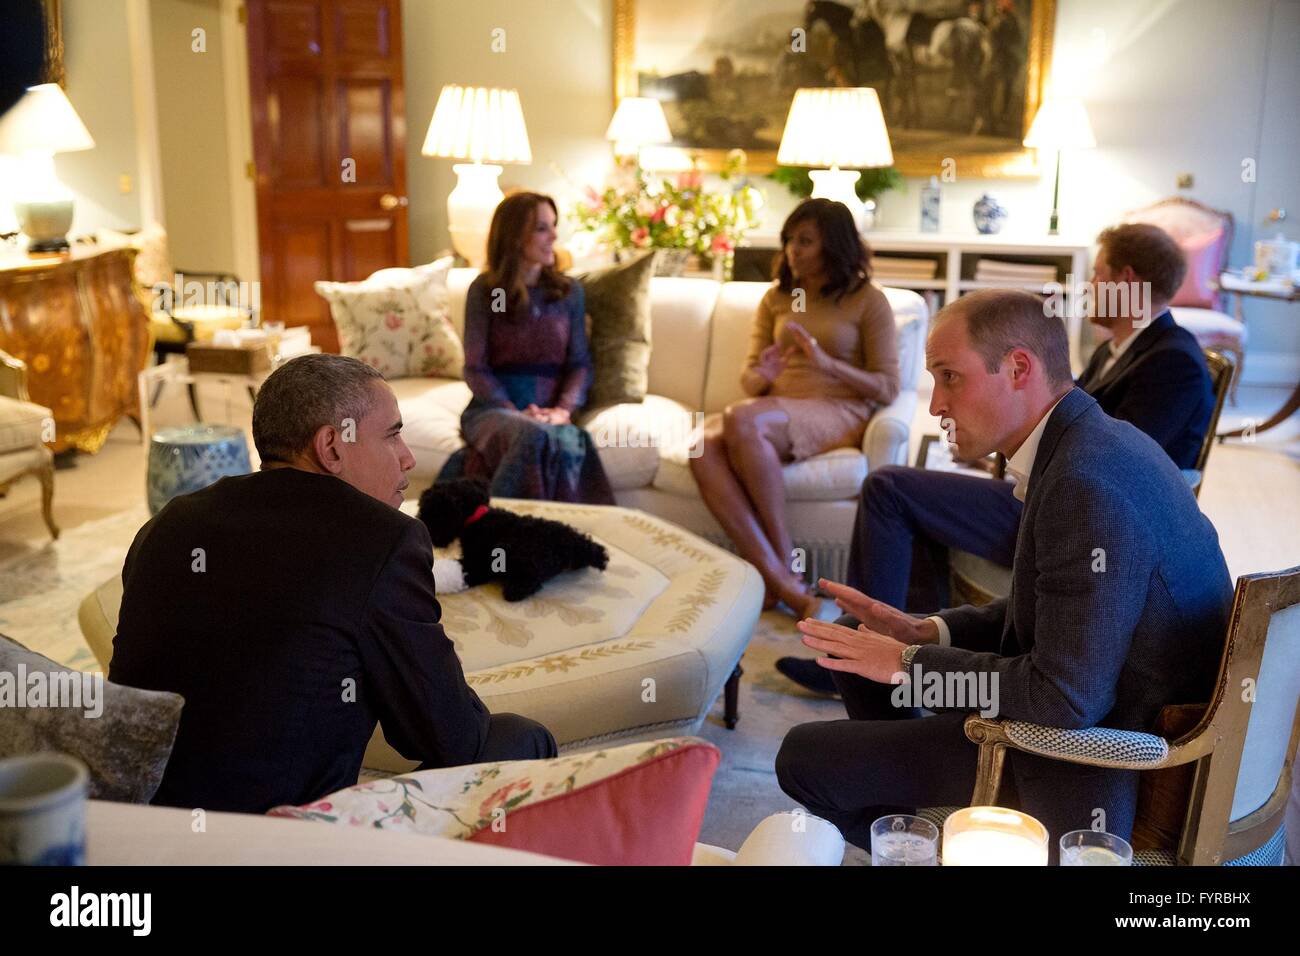 U.S President Barack Obama talks with Prince William, the Duke of Cambridge while Kate Middleton, Duchess of Cambridge and Prince Harry of Wales, speak with First Lady Michelle Obama at Kensington Palace April 22, 2016 in London, United Kingdom. Stock Photo